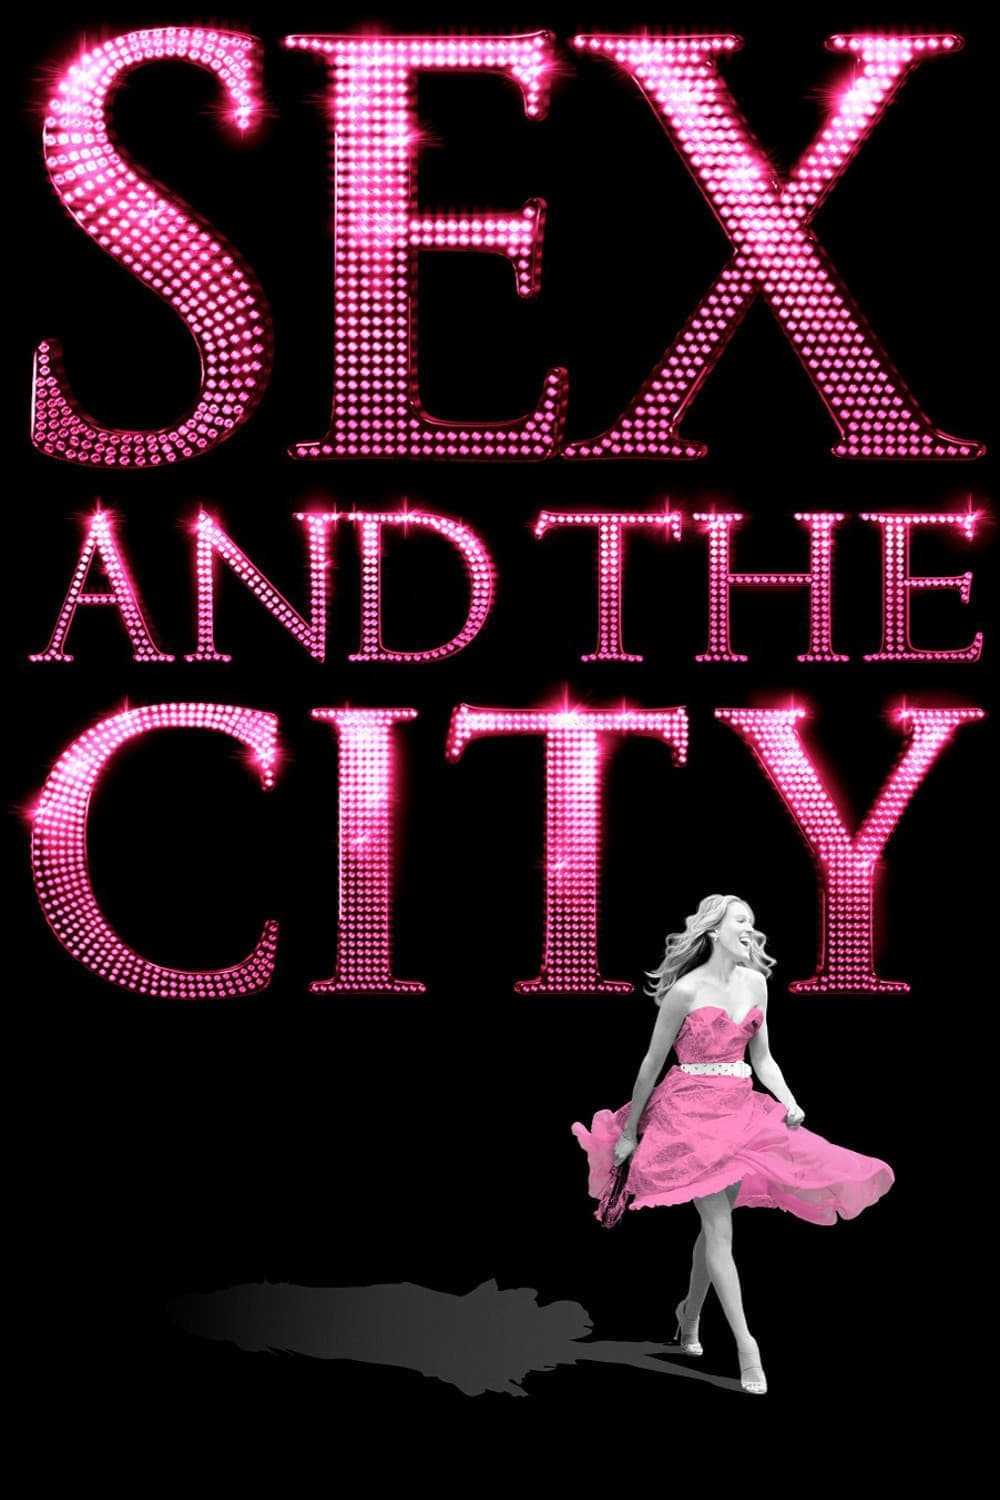 Sex and the City, Le film